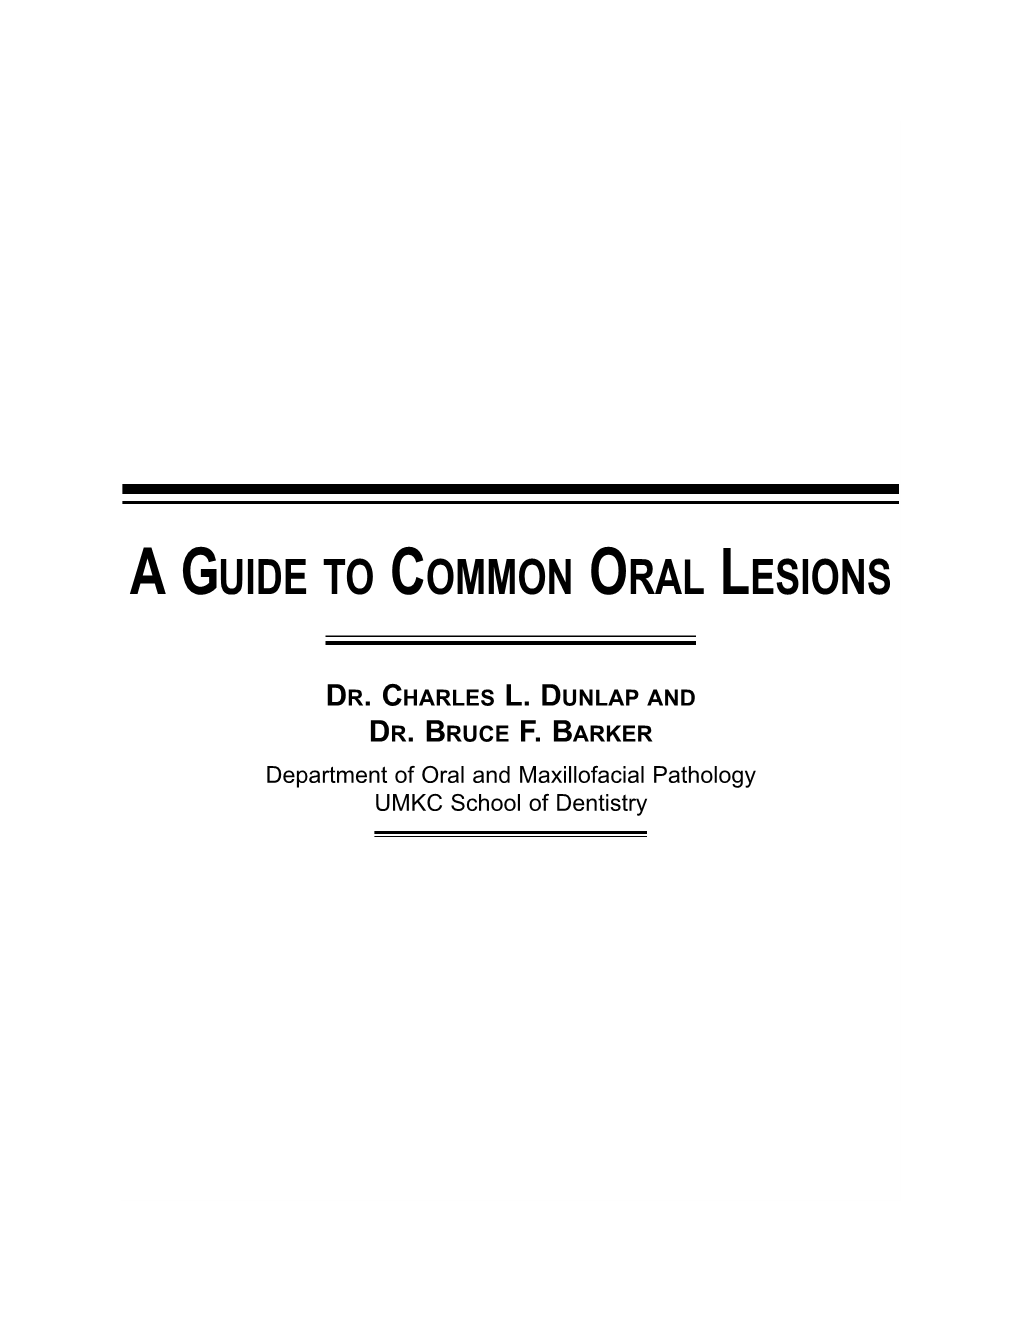 A Guide to Common Oral Lesions